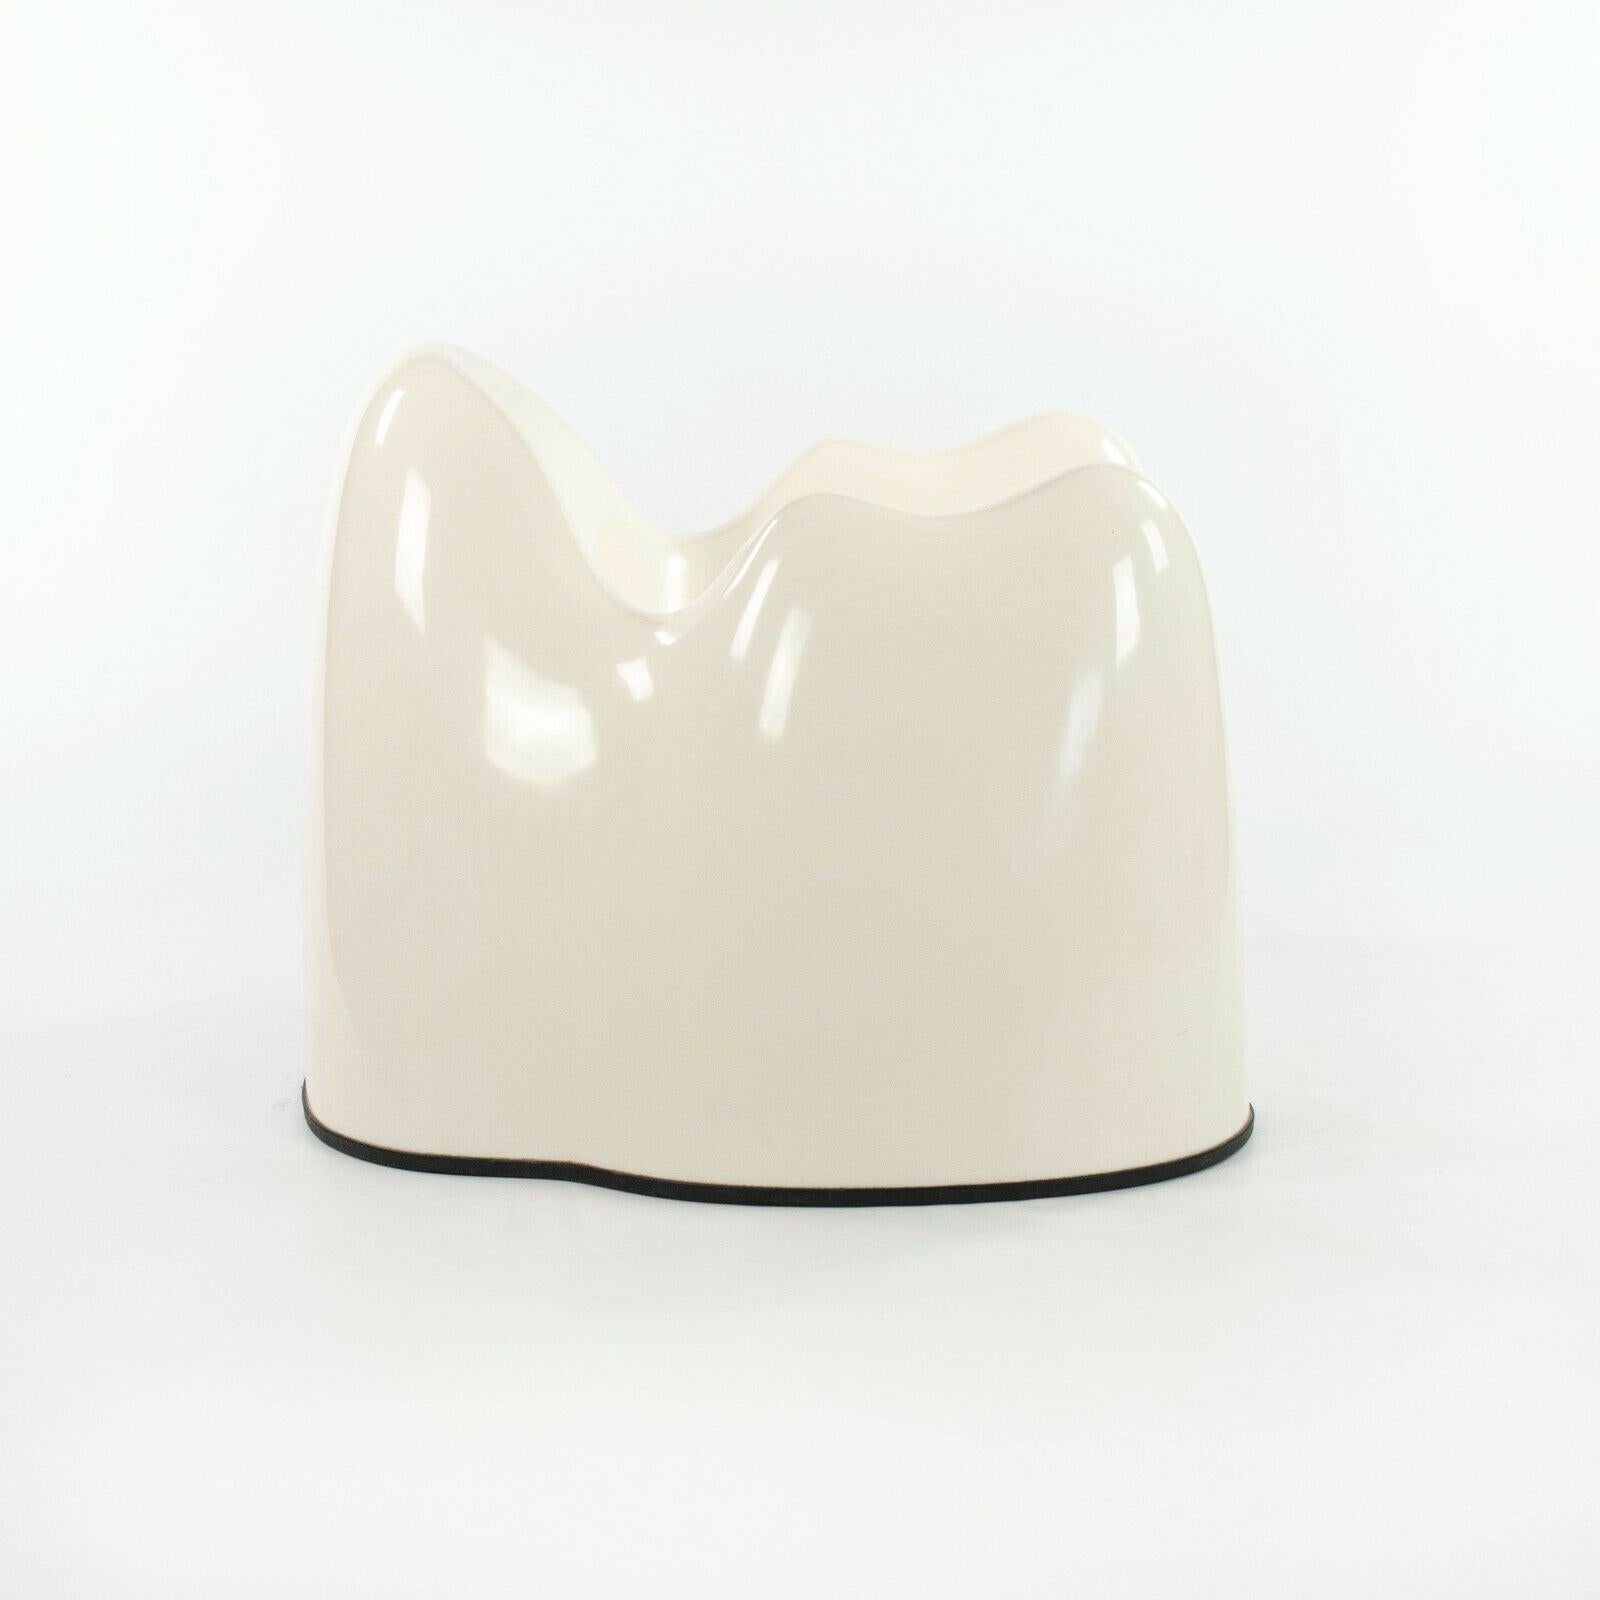 American 1970s Wendell Castle Molar Chair in Fiberglass by Northern Plastics of Syracuse For Sale